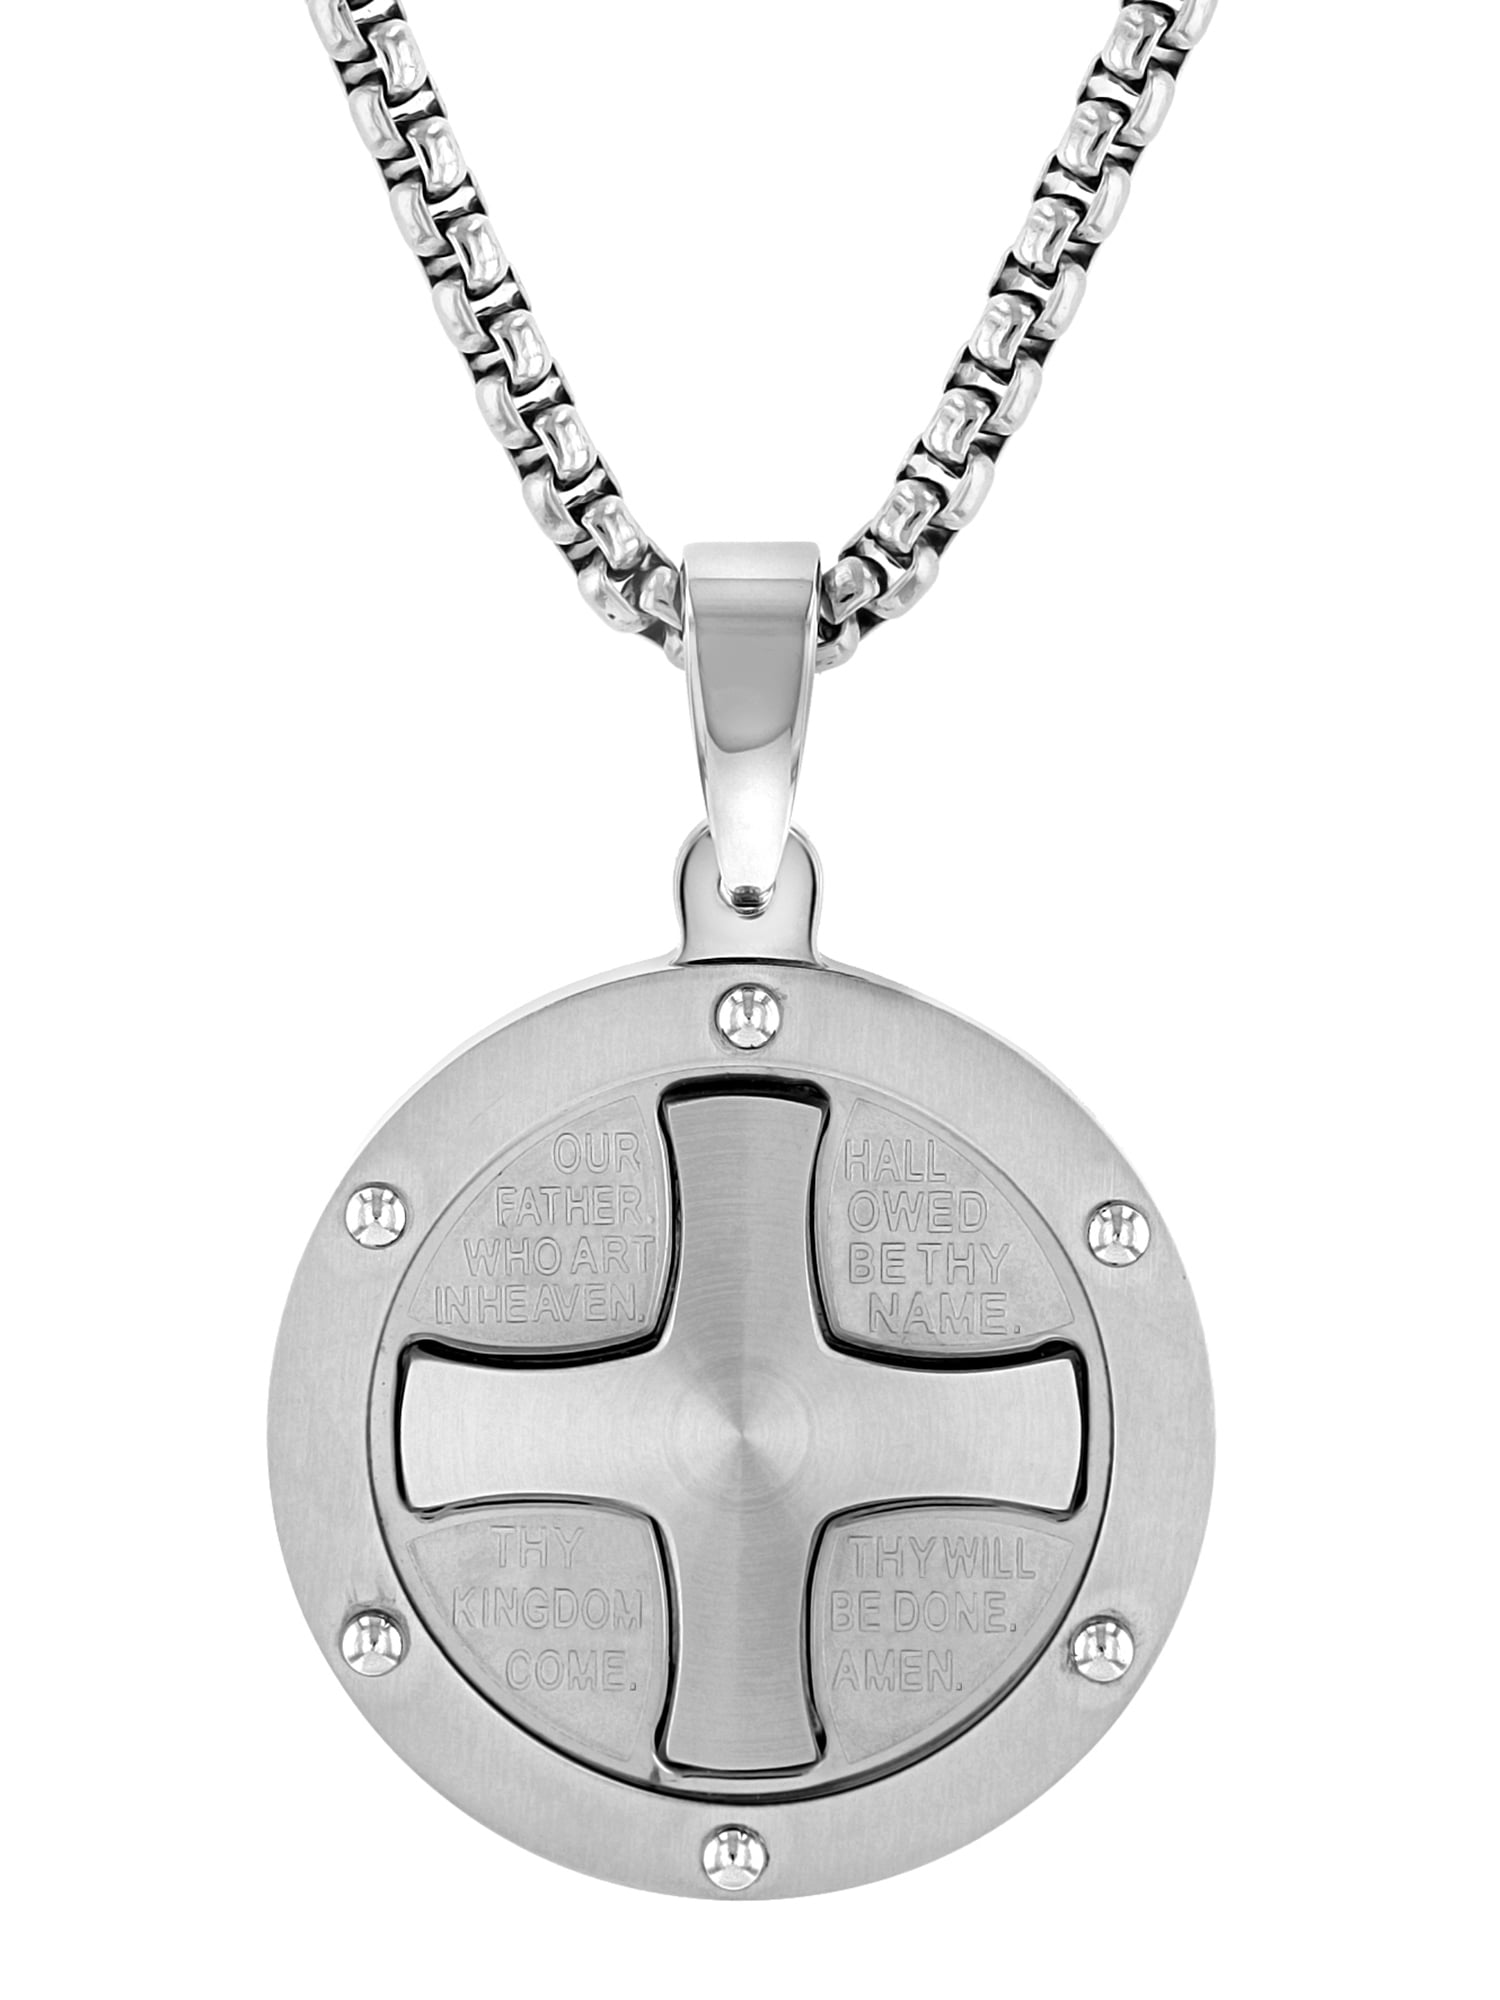 Unisex Stainless Steel Our Father Prayer Round Pendant Necklace